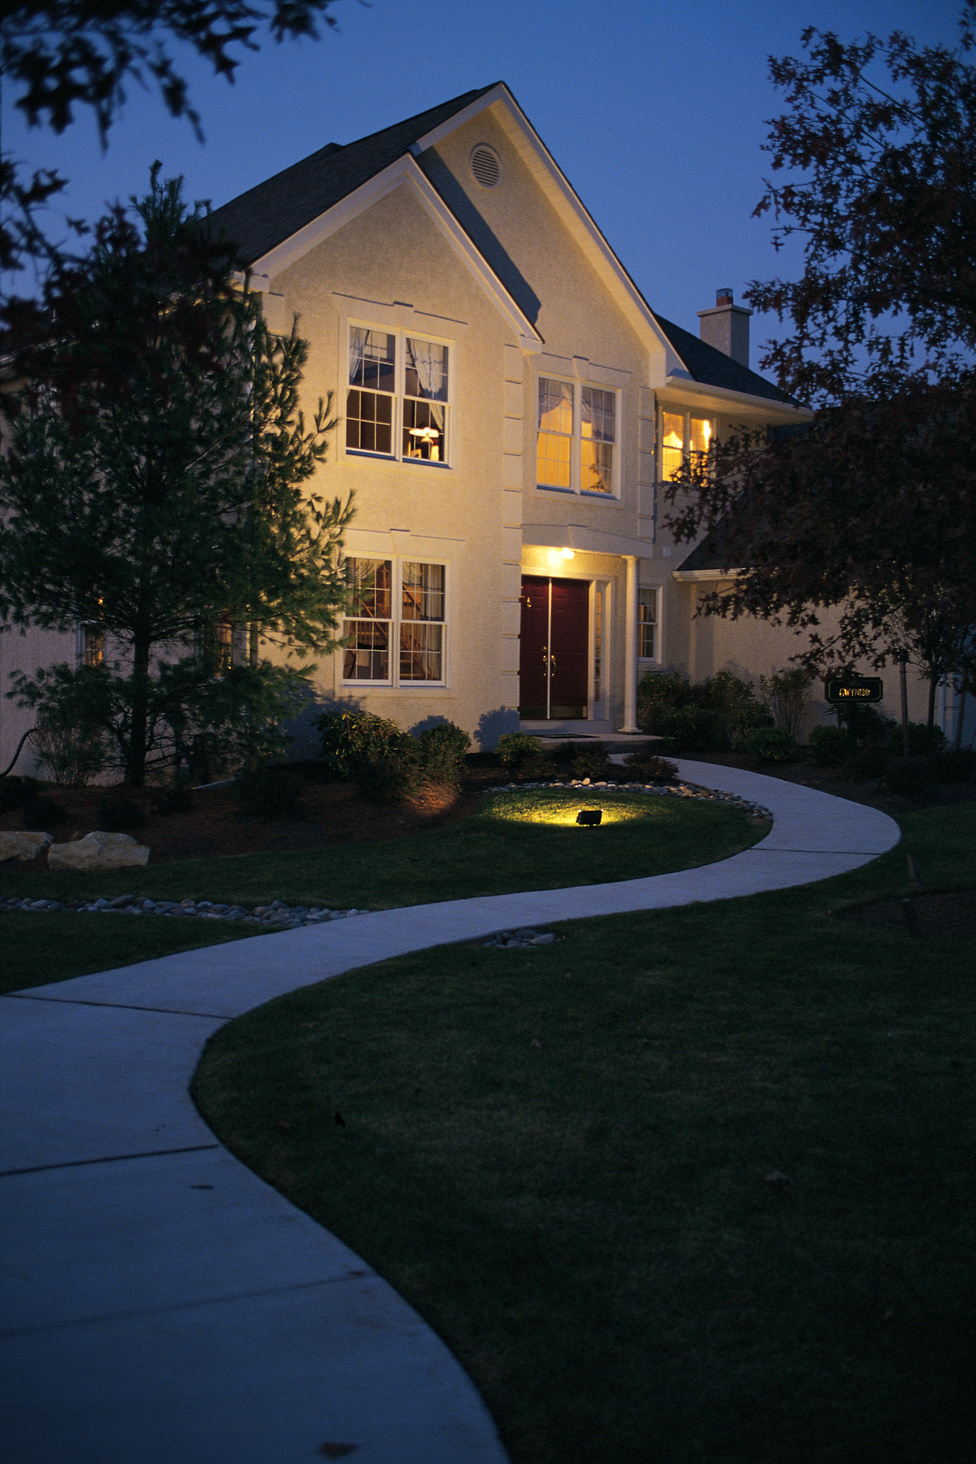 Home exterior lit at night